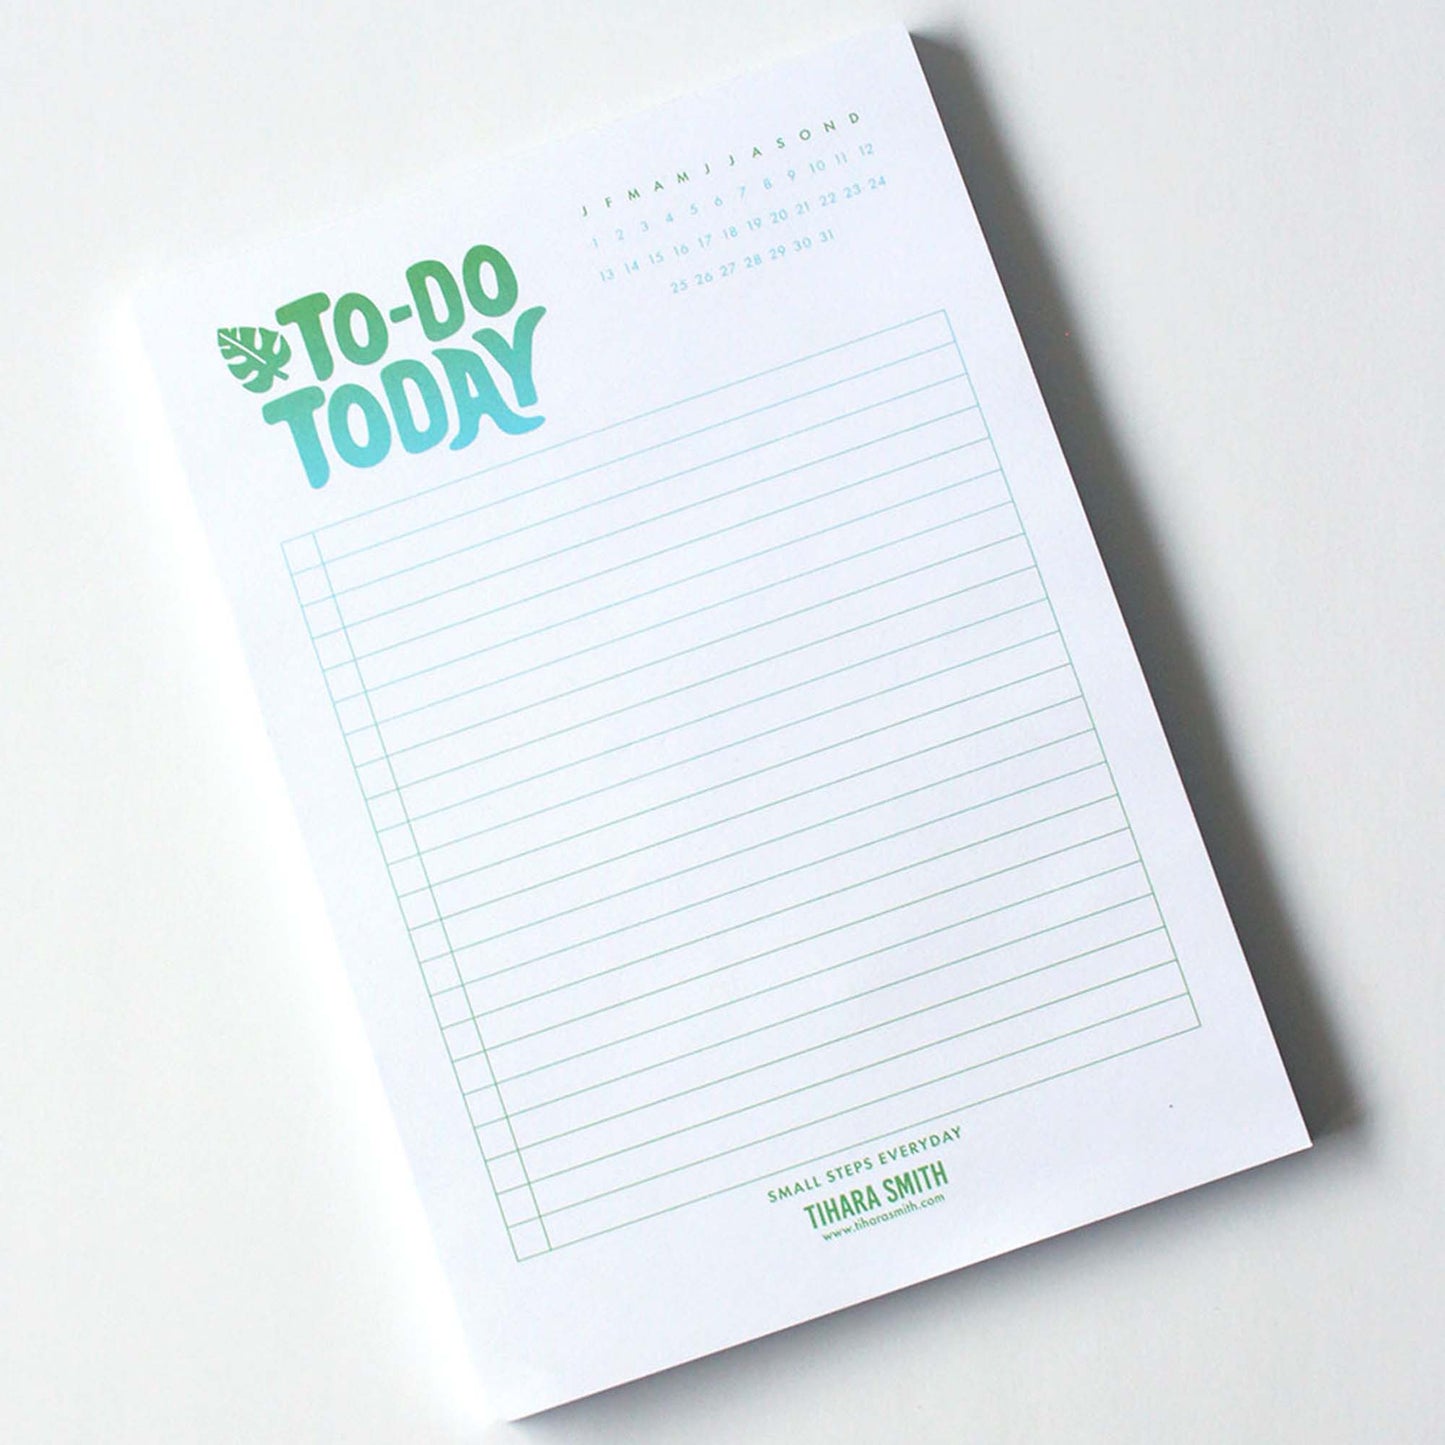 To Do Today Notepad